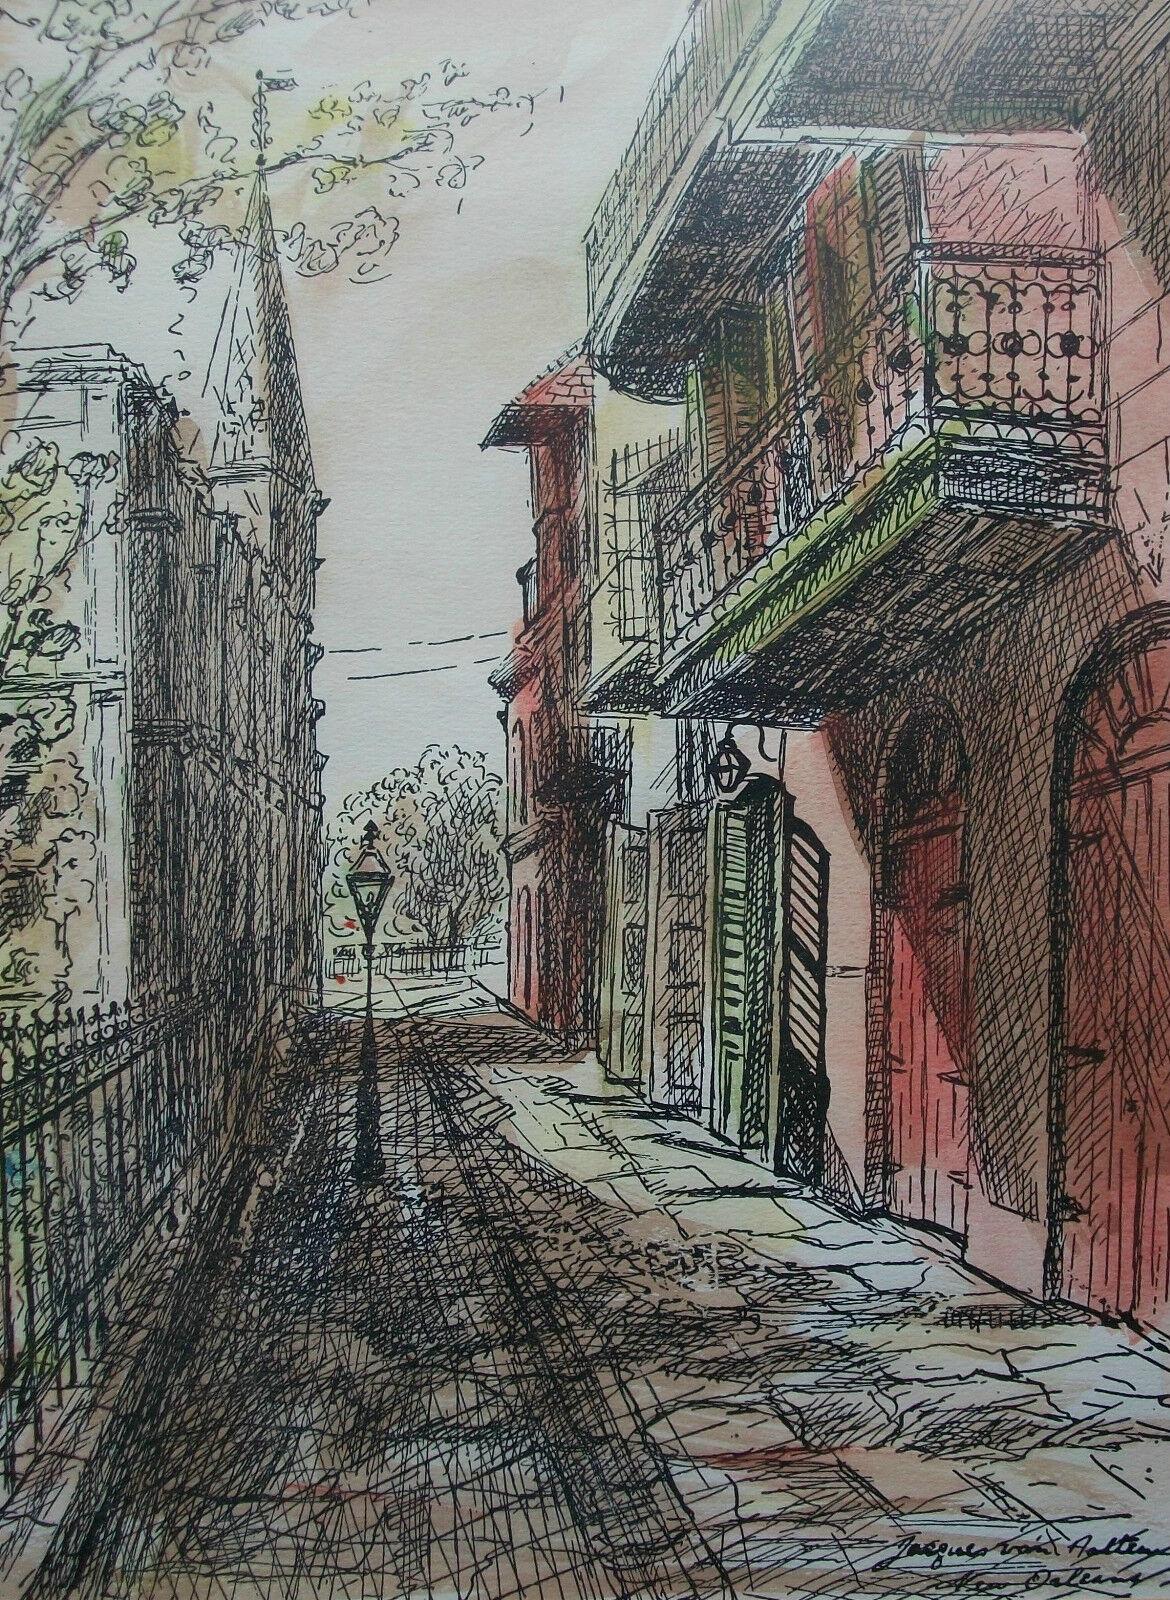 JACQUES VAN AALTEN (Belgian/American 1907-1997) - 'New Orleans' - Vintage hand colored print on paper - signed and titled in the print - contained in a vintage frame under non glare glass - finished with a single bevel edged matte board - framer